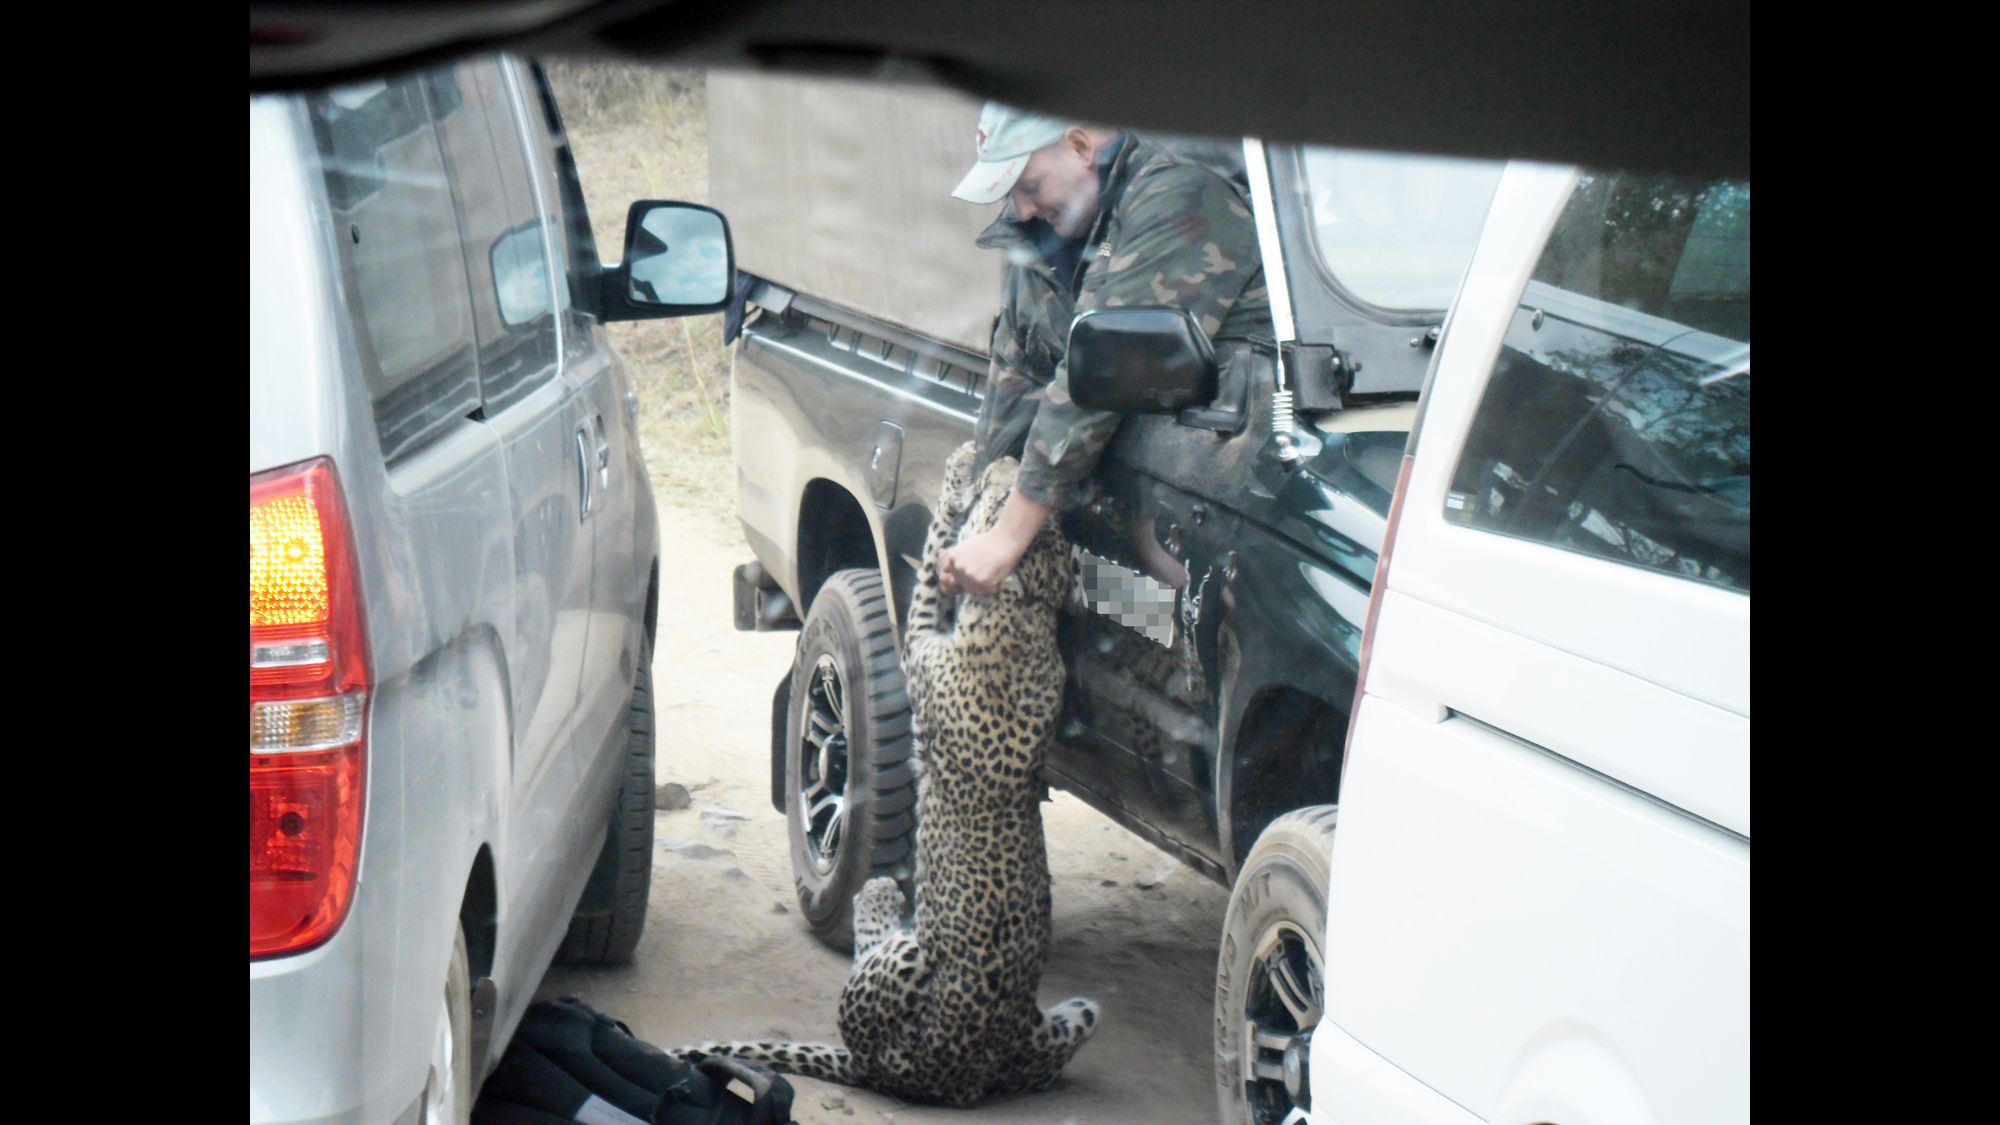 How to avoid a leopard attack - Discover Wildlife